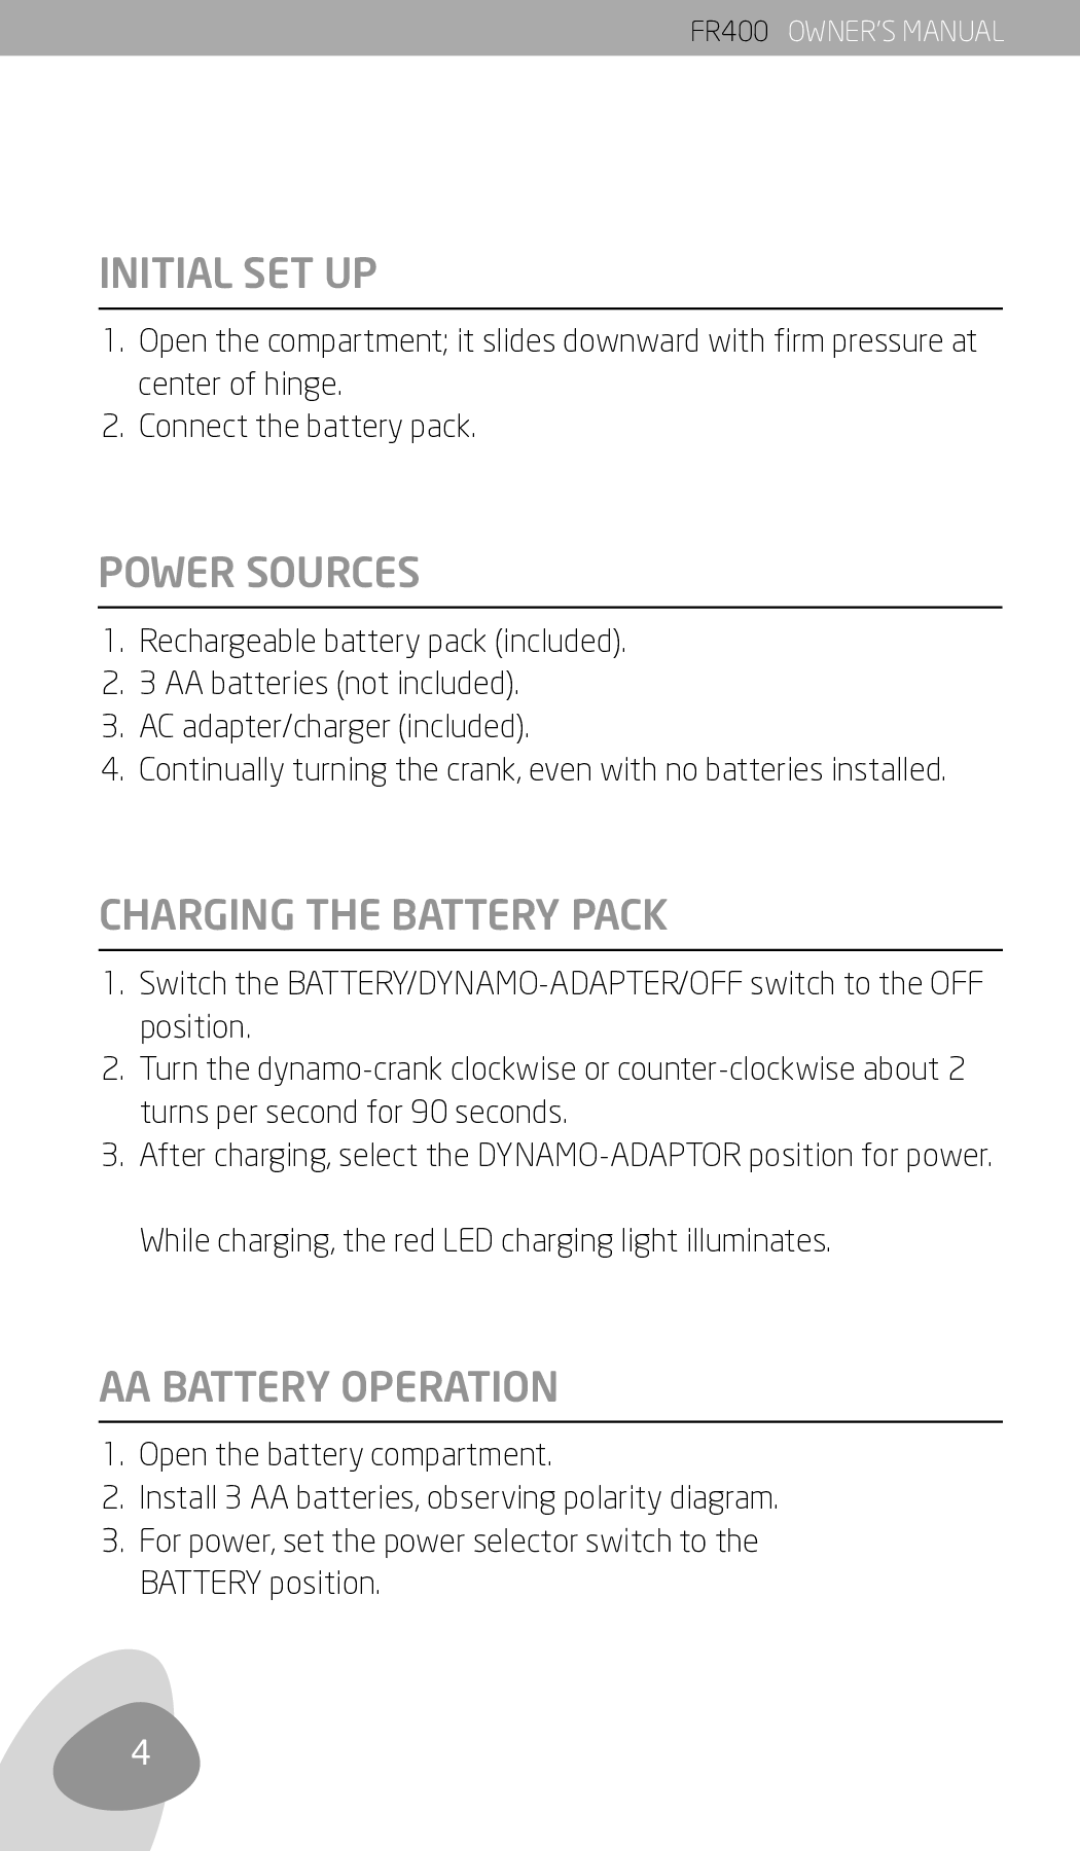 Eton FR400 owner manual Initial SET UP, Power Sources, Charging the Battery Pack, AA Battery Operation 